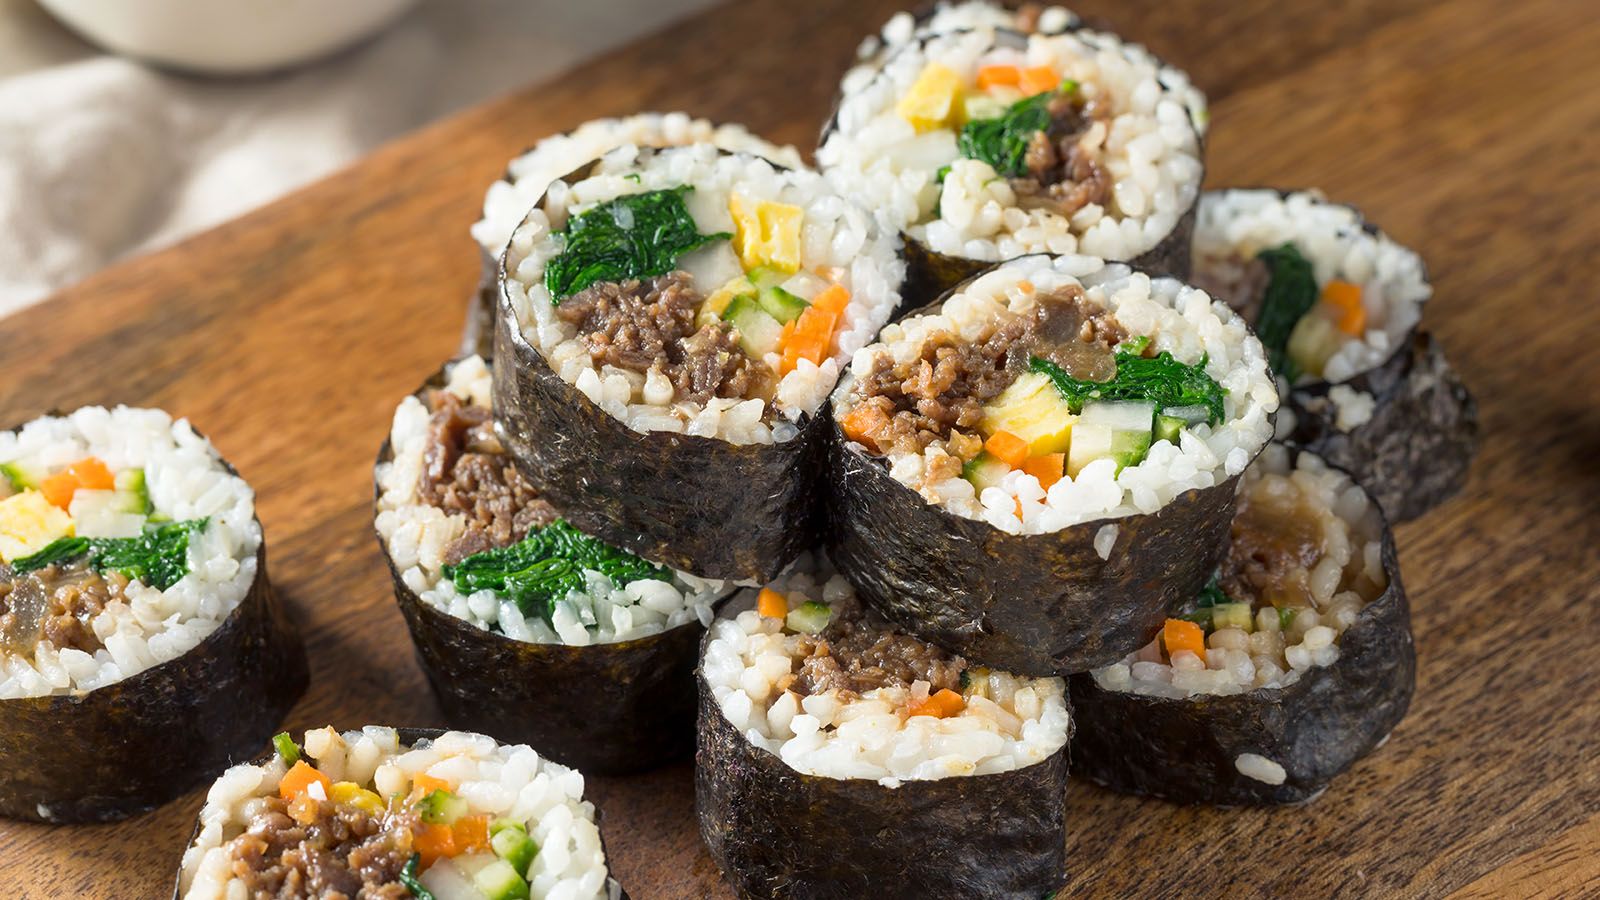 Kimbap is on the items you may try at Taste of Korea at the downtown library on Sunday, May 12.